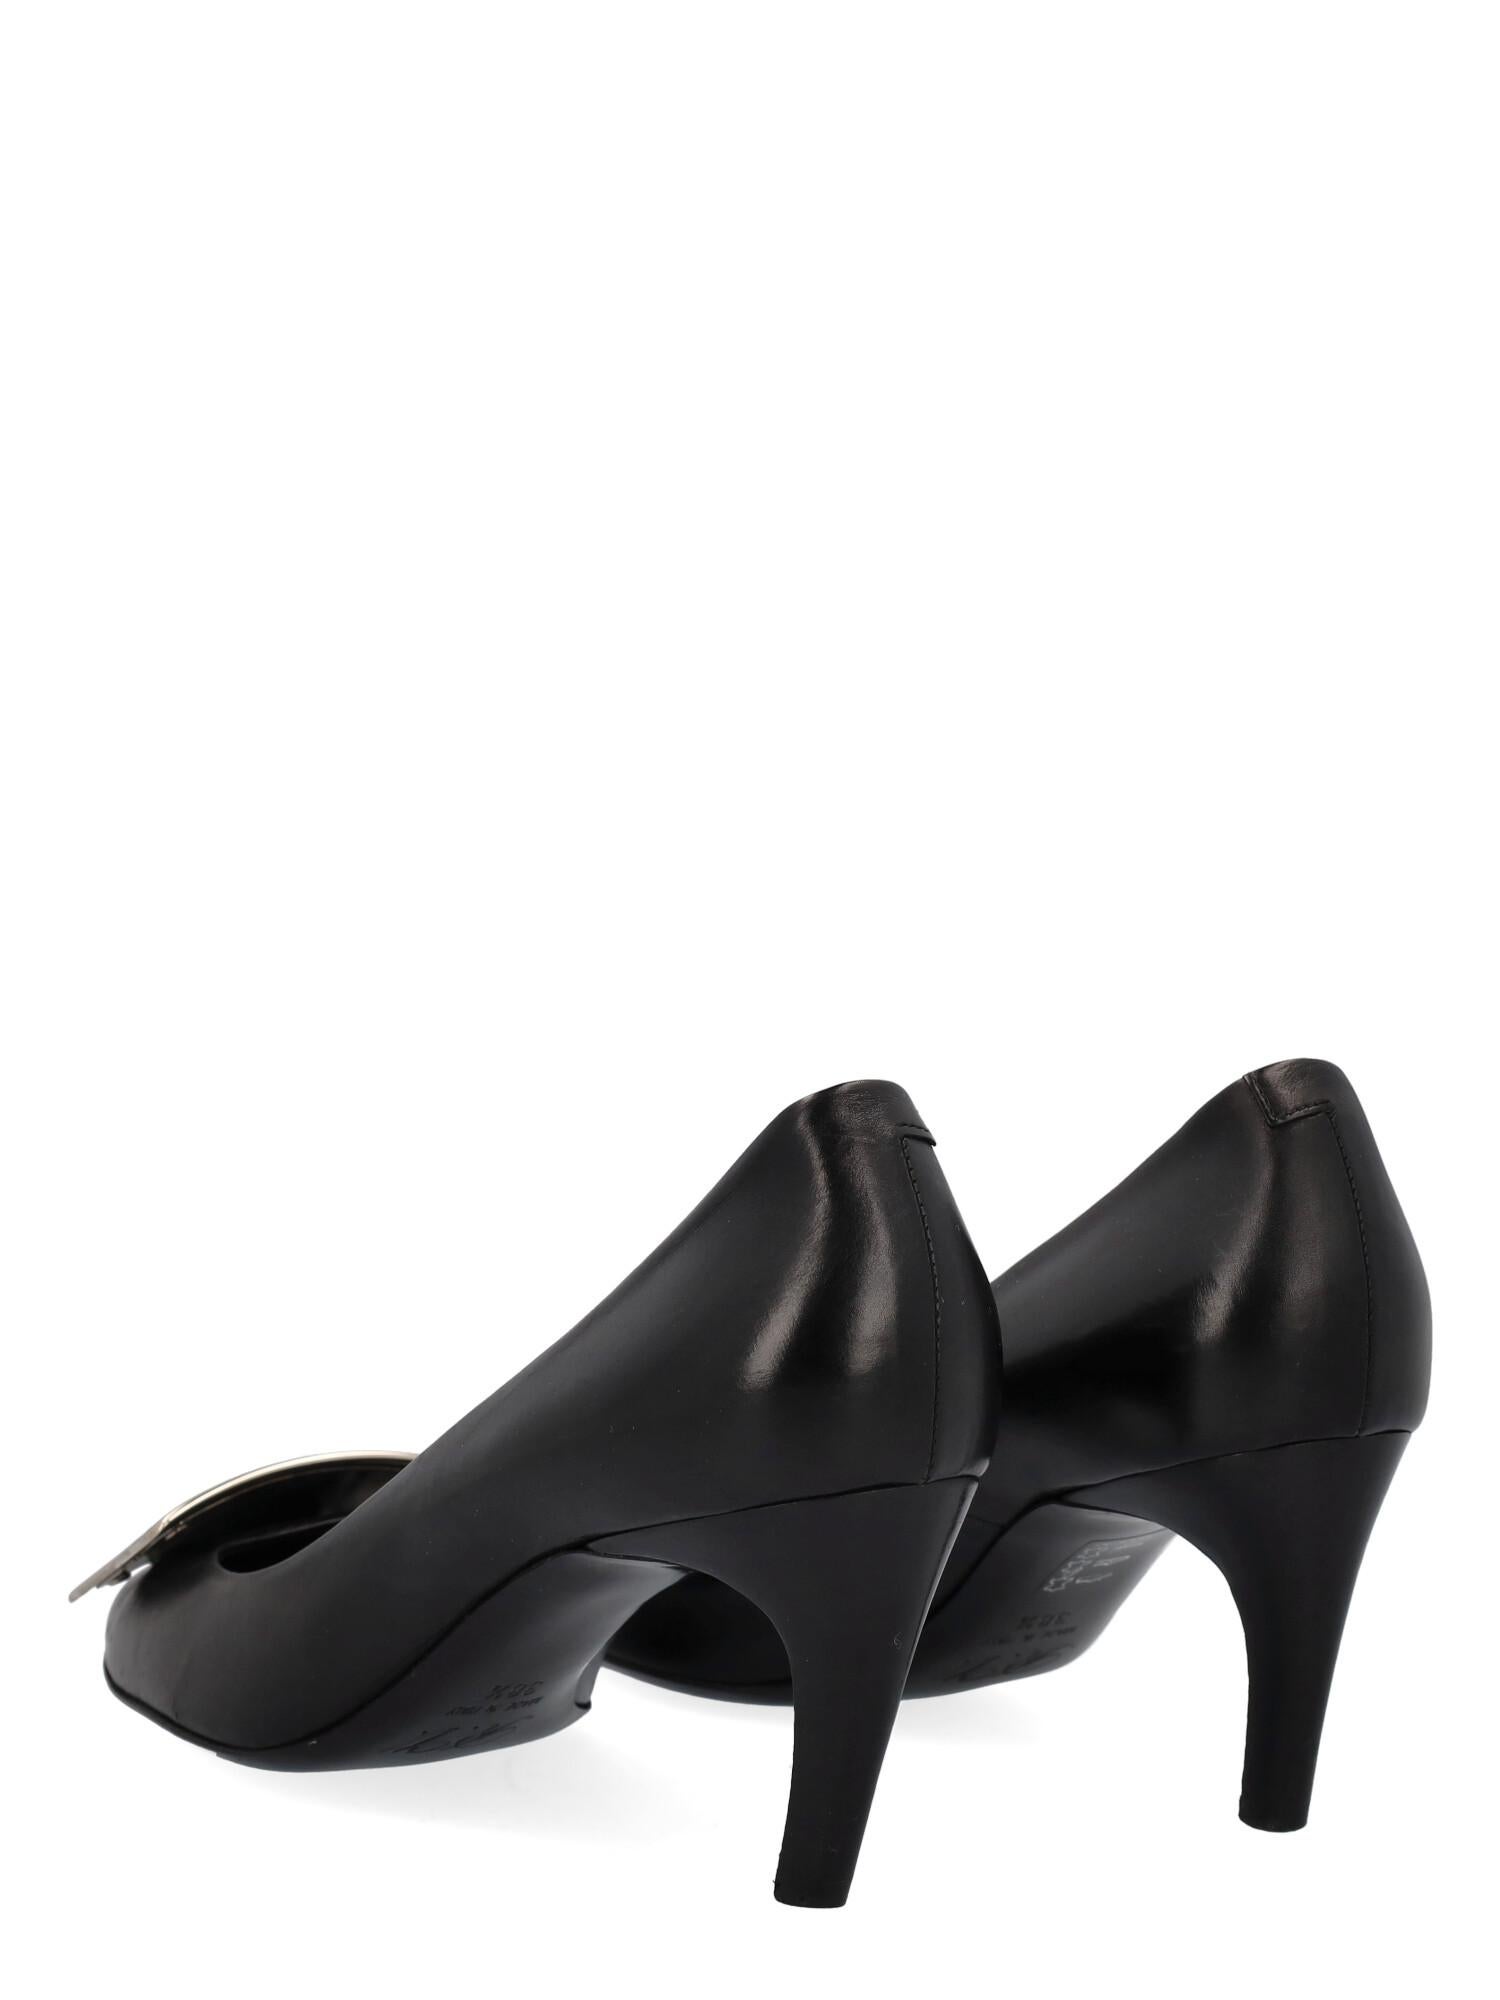 Roger Vivier Women Pumps Black Leather EU 38.5 In Good Condition For Sale In Milan, IT